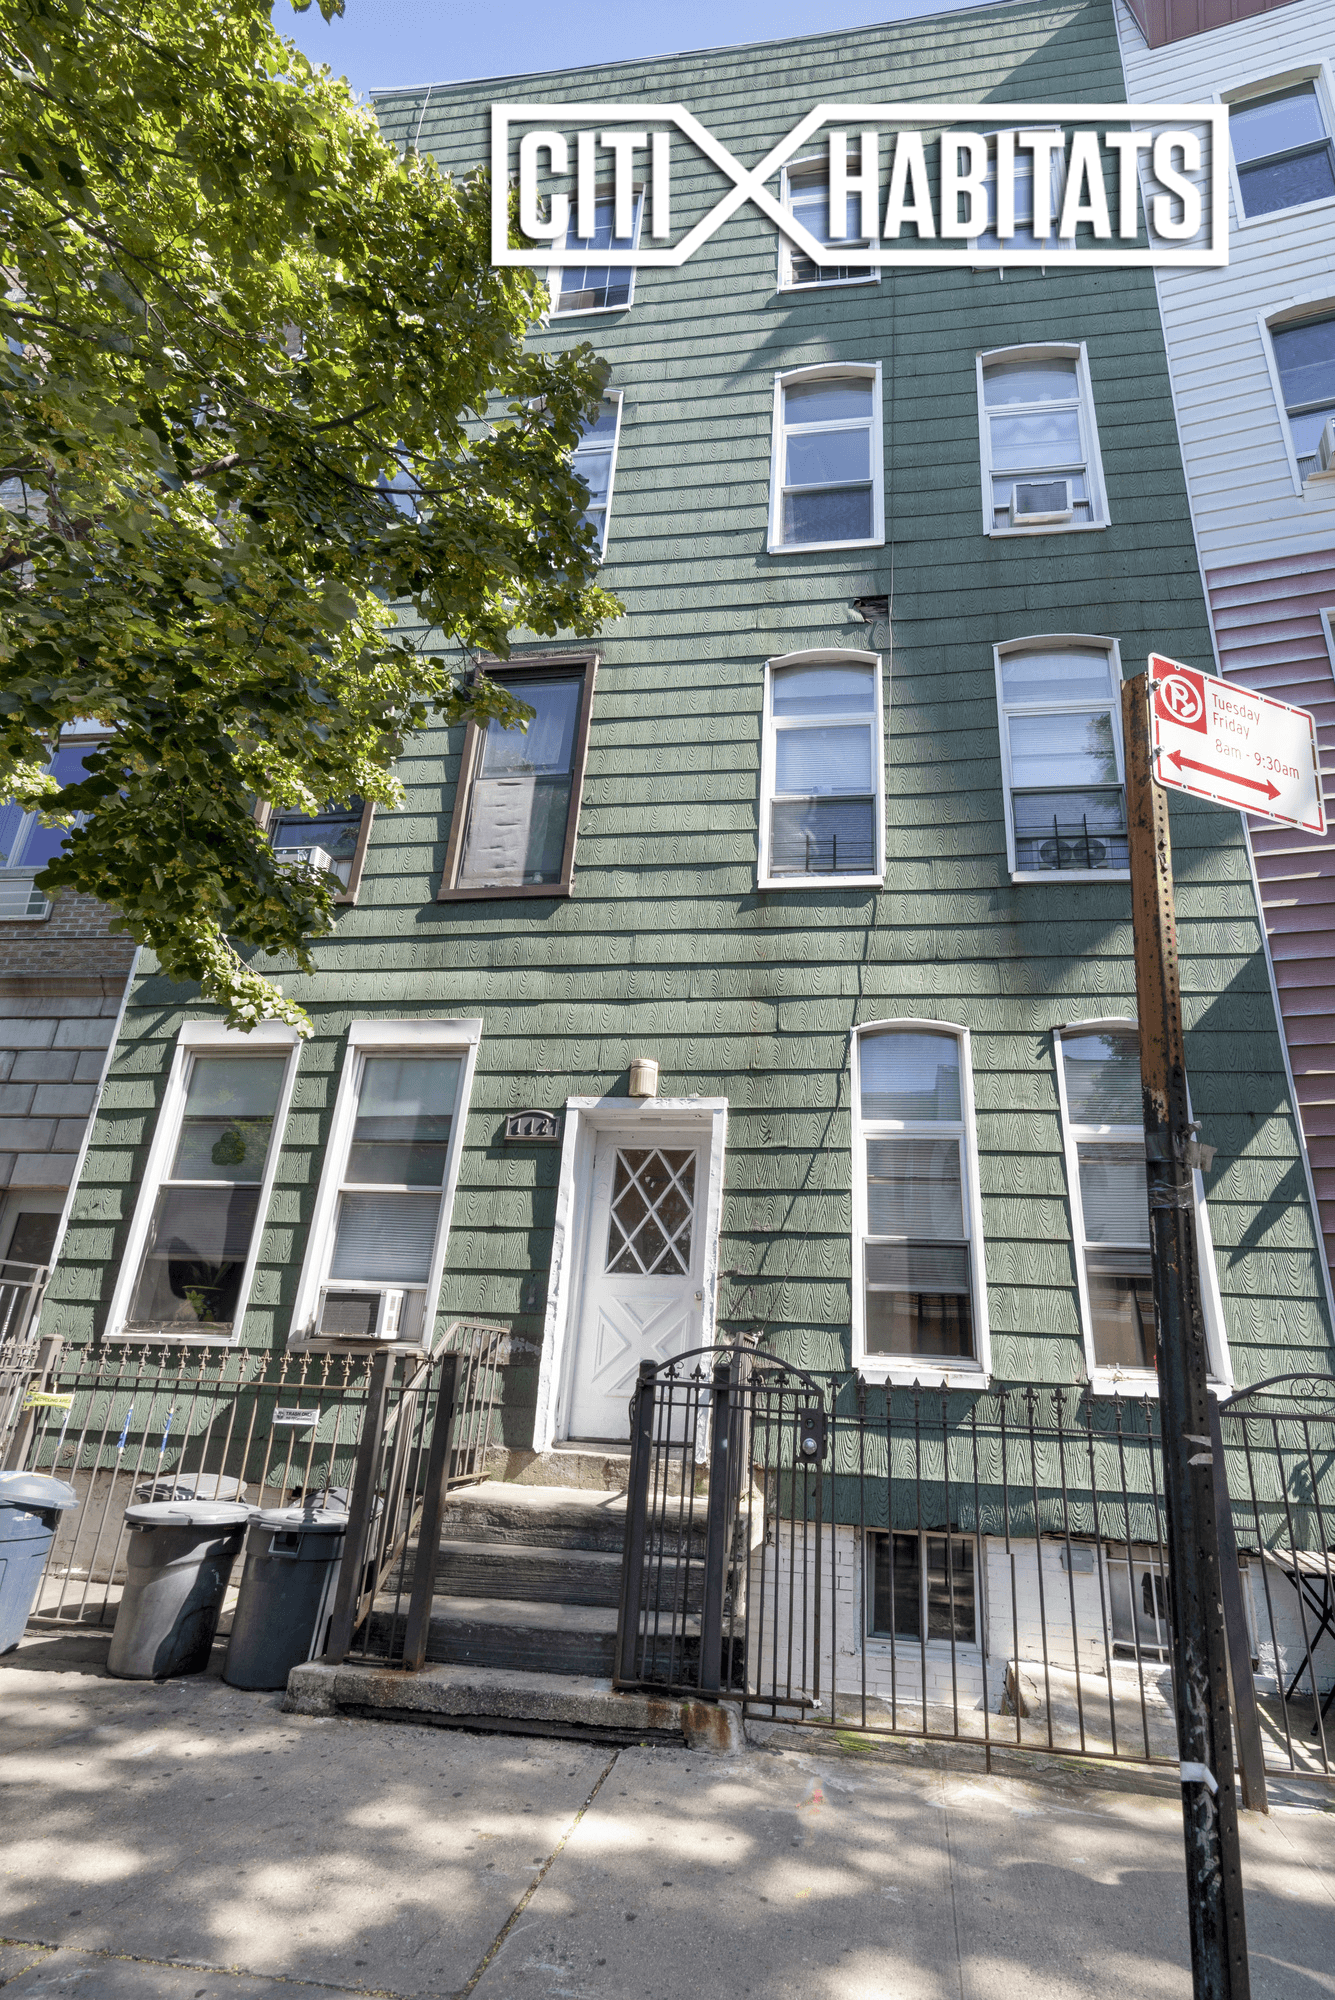 Over sized Townhouse on a tree lined block in Greenpoint by Franklin Street, in the heart of Historic Greenpoint.